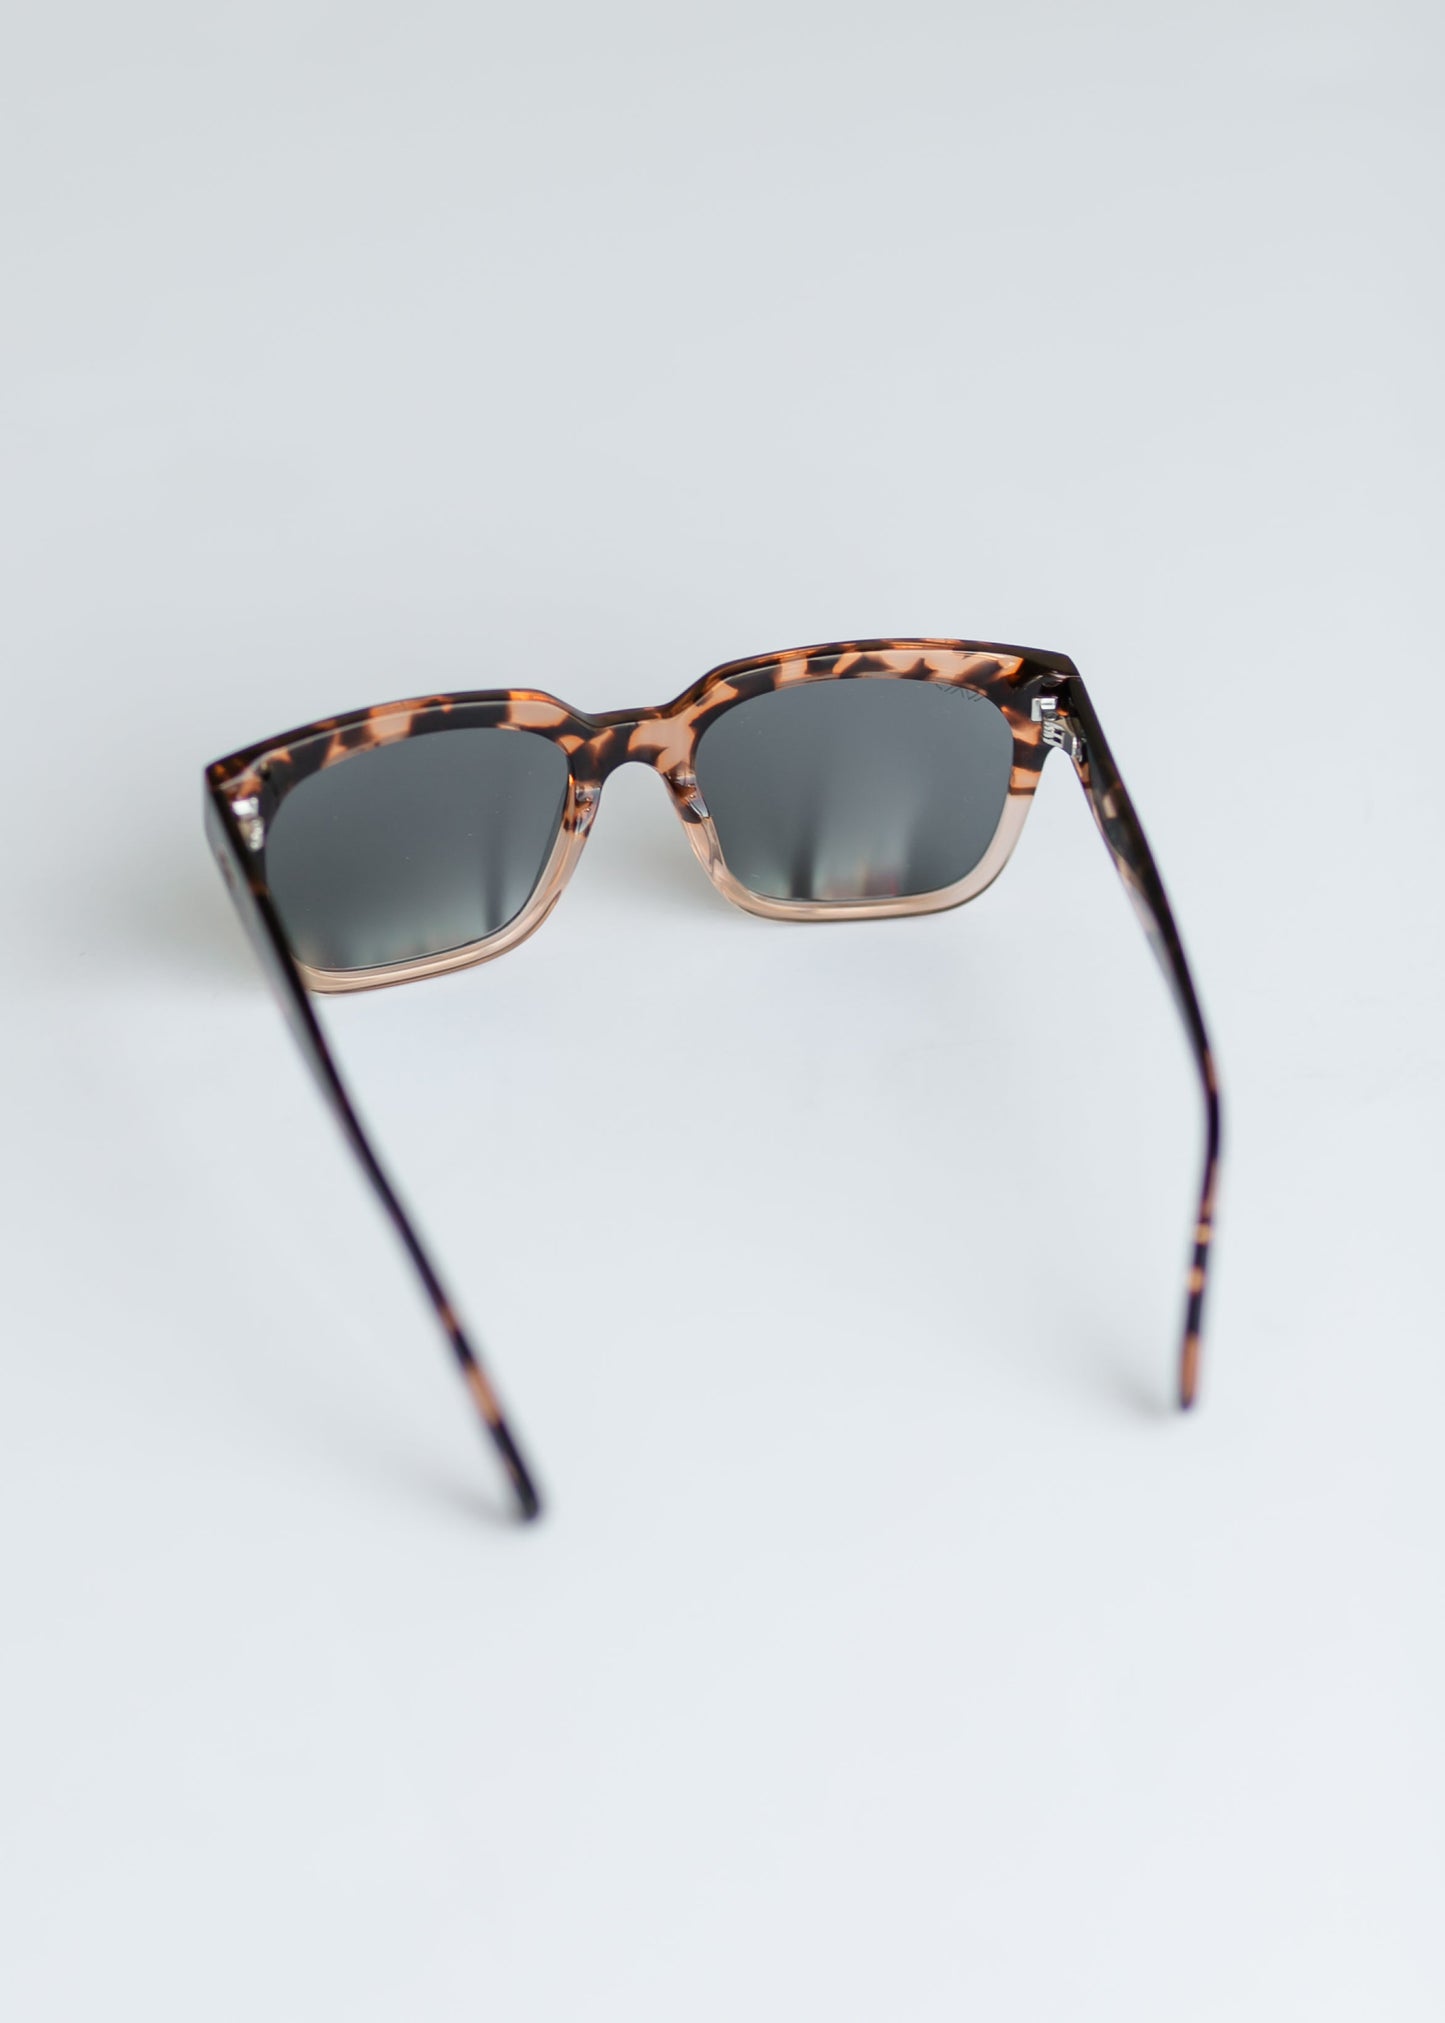 Crystal Brown Tortoise Square Sunglasses Accessories